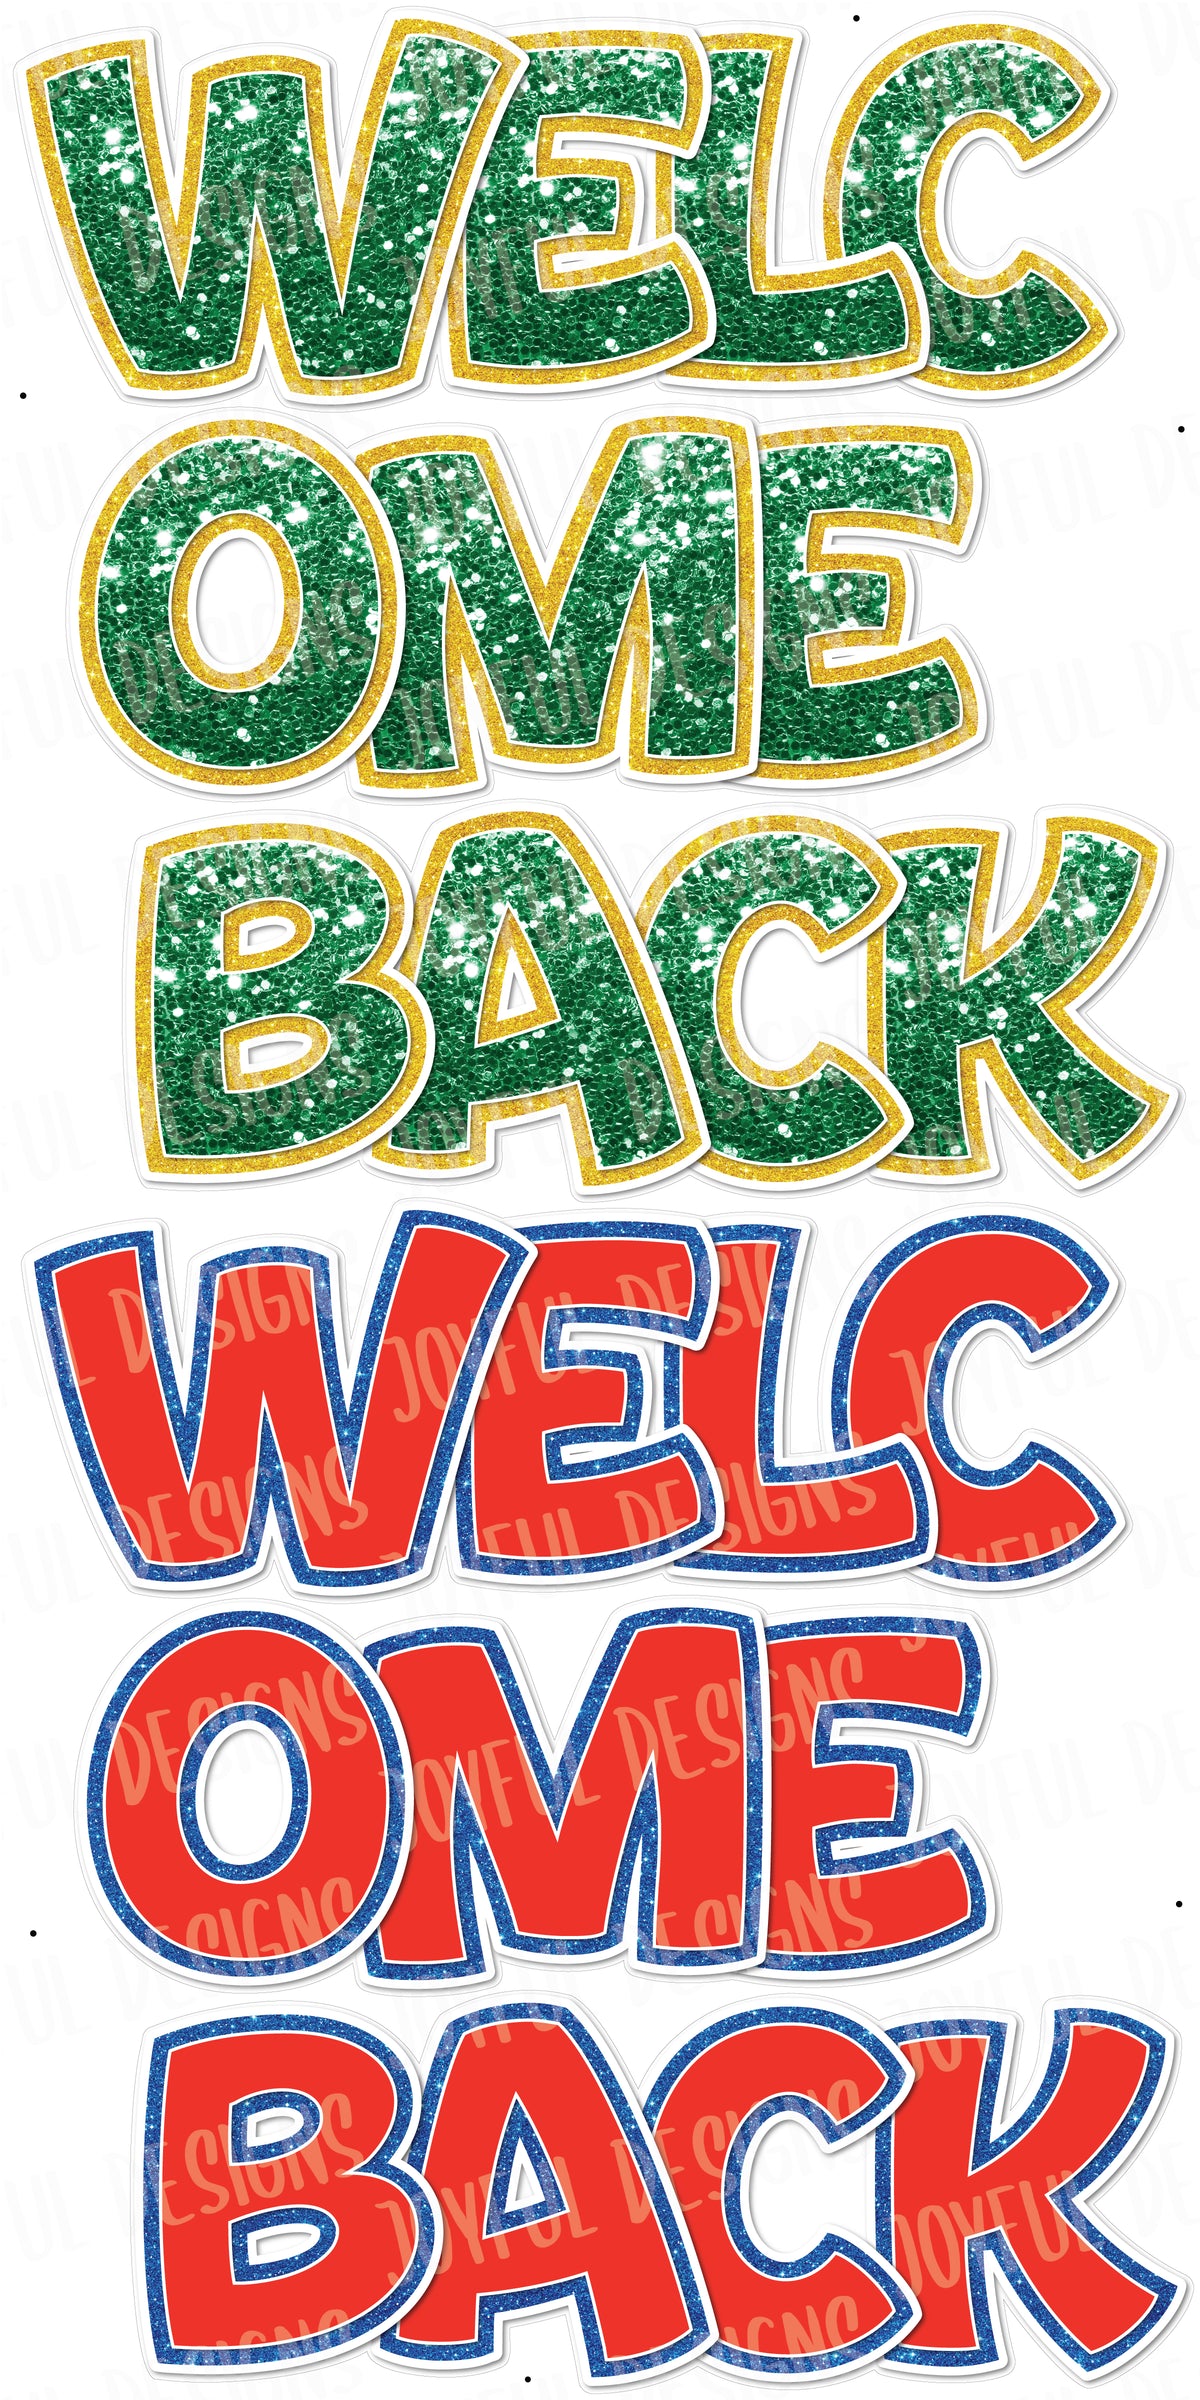 2 WELCOME BACK Quick Sets - Pick Your Fill & Border Colors!